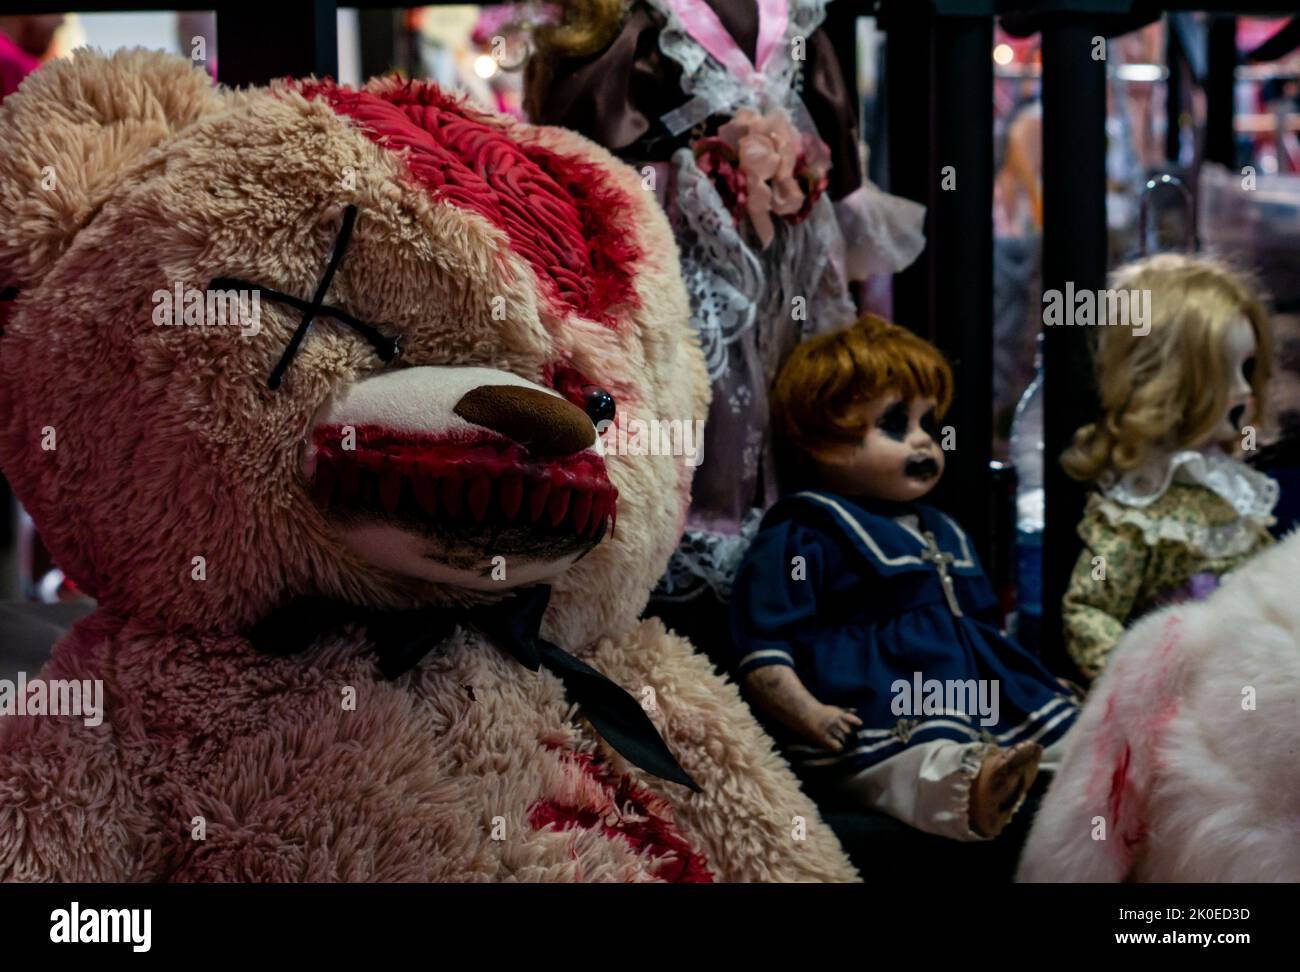 teddy bear with horror style dolls covered in blood Stock Photo